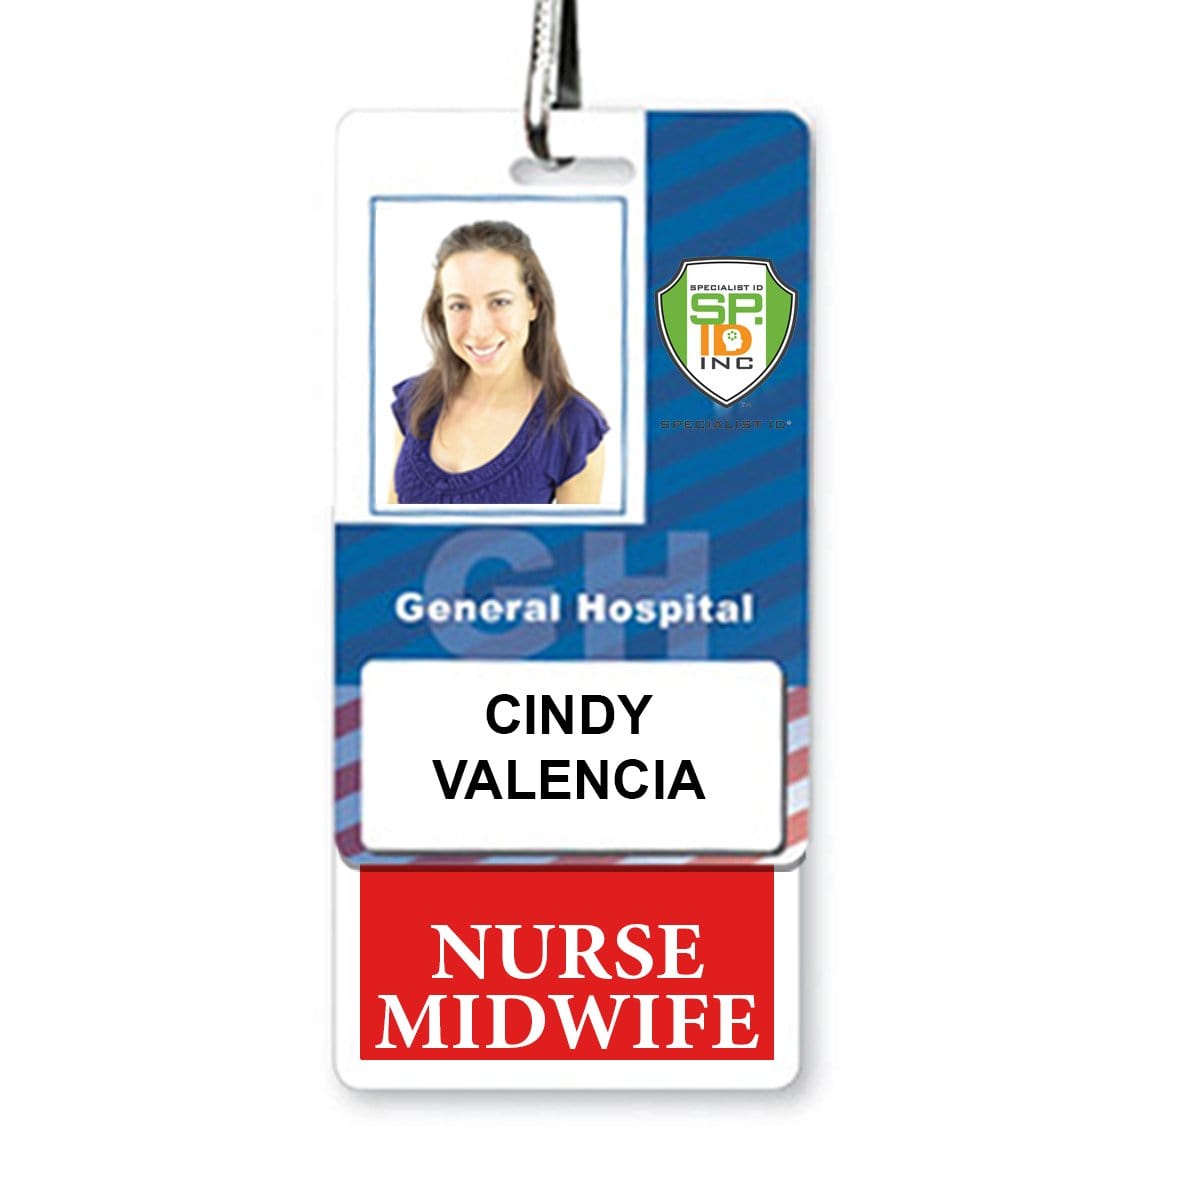 Red "NURSE MIDWIFE" Vertical Badge Buddy with Red Border BB-NURSEMIDWIFE-RED-V